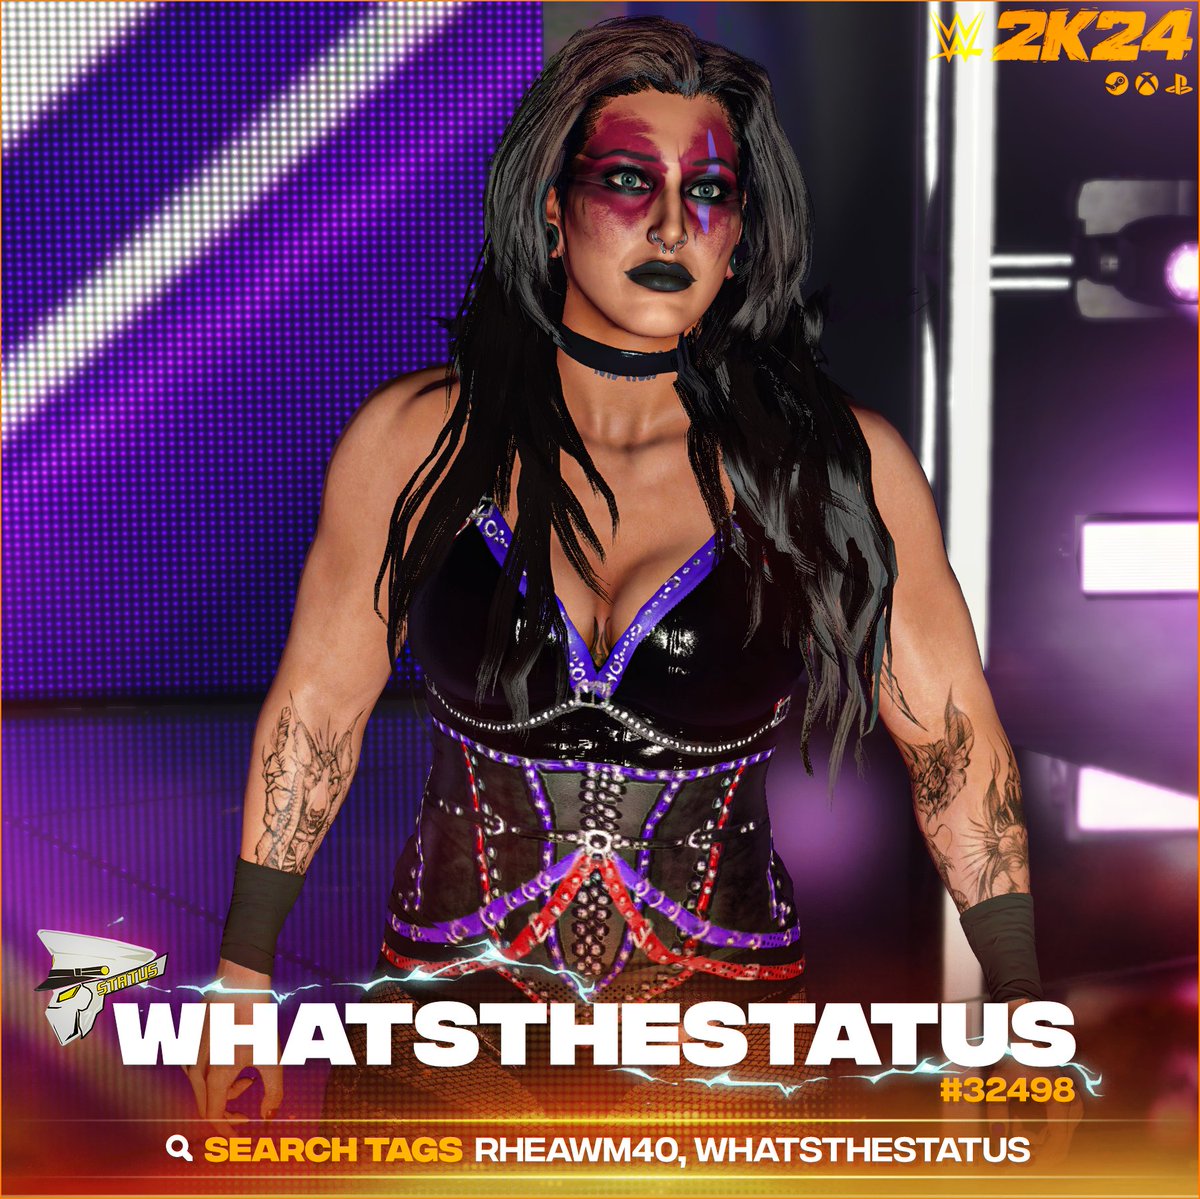 ReUpload! #WWE2K24 Upload To Community Creations! ★ Rhea Ripley '24 (WRESTLEMANIA XL) (InGame Model Edit) ★ Search Tag → RHEAWM40 or WhatsTheStatus ★ Collaboration with @ThePugnificent ★ Support Me → linktr.ee/WhatsTheStatus ★ INCLUDES ● Custom Portrait ● Commentary…